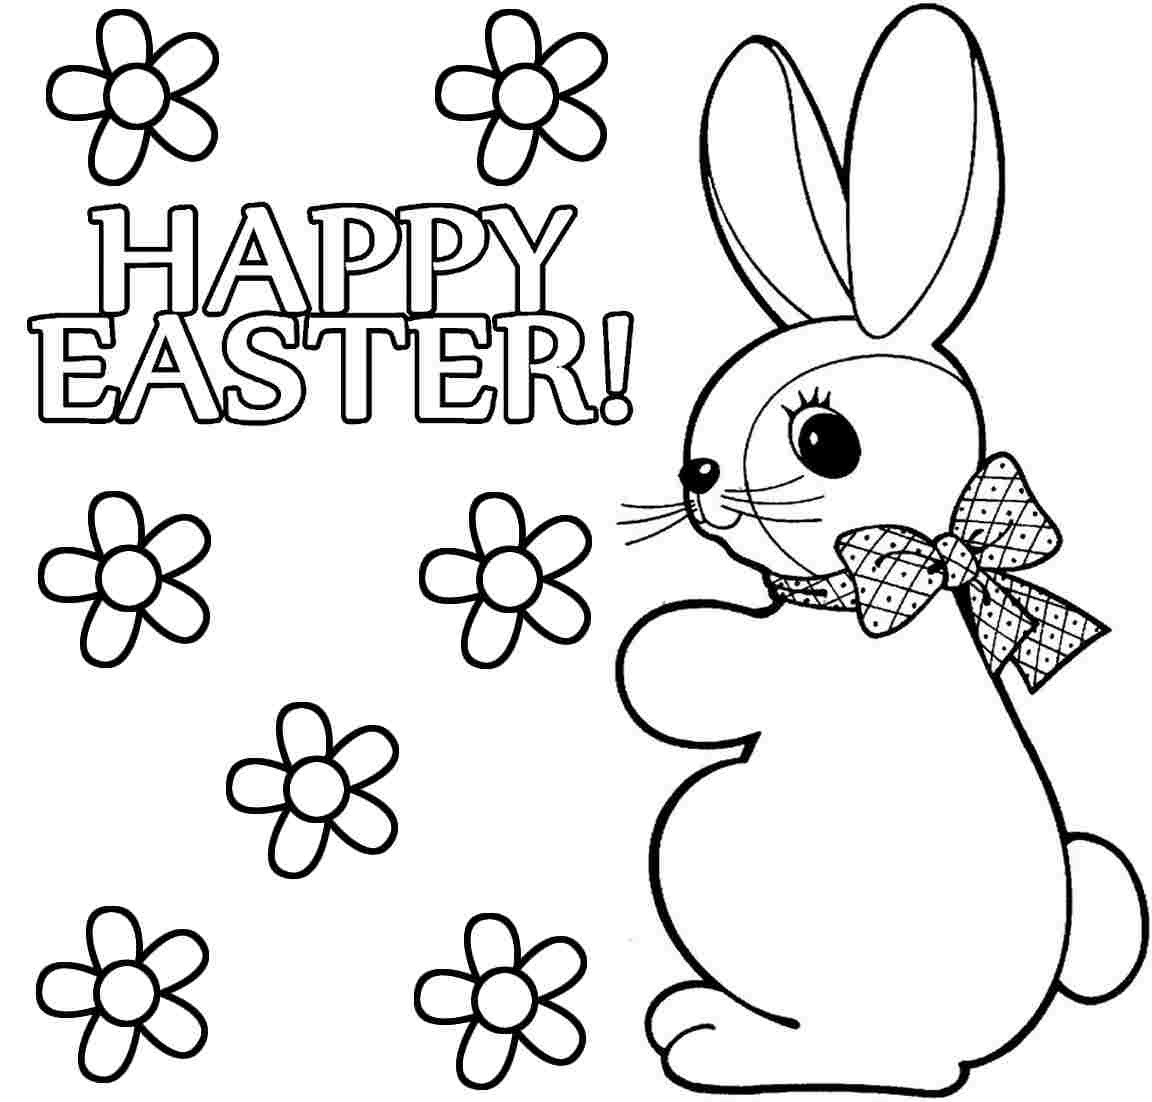 Free Printable Easter Coloring Pages For Preschoolers – Happy Easter - Free Printable Easter Drawings